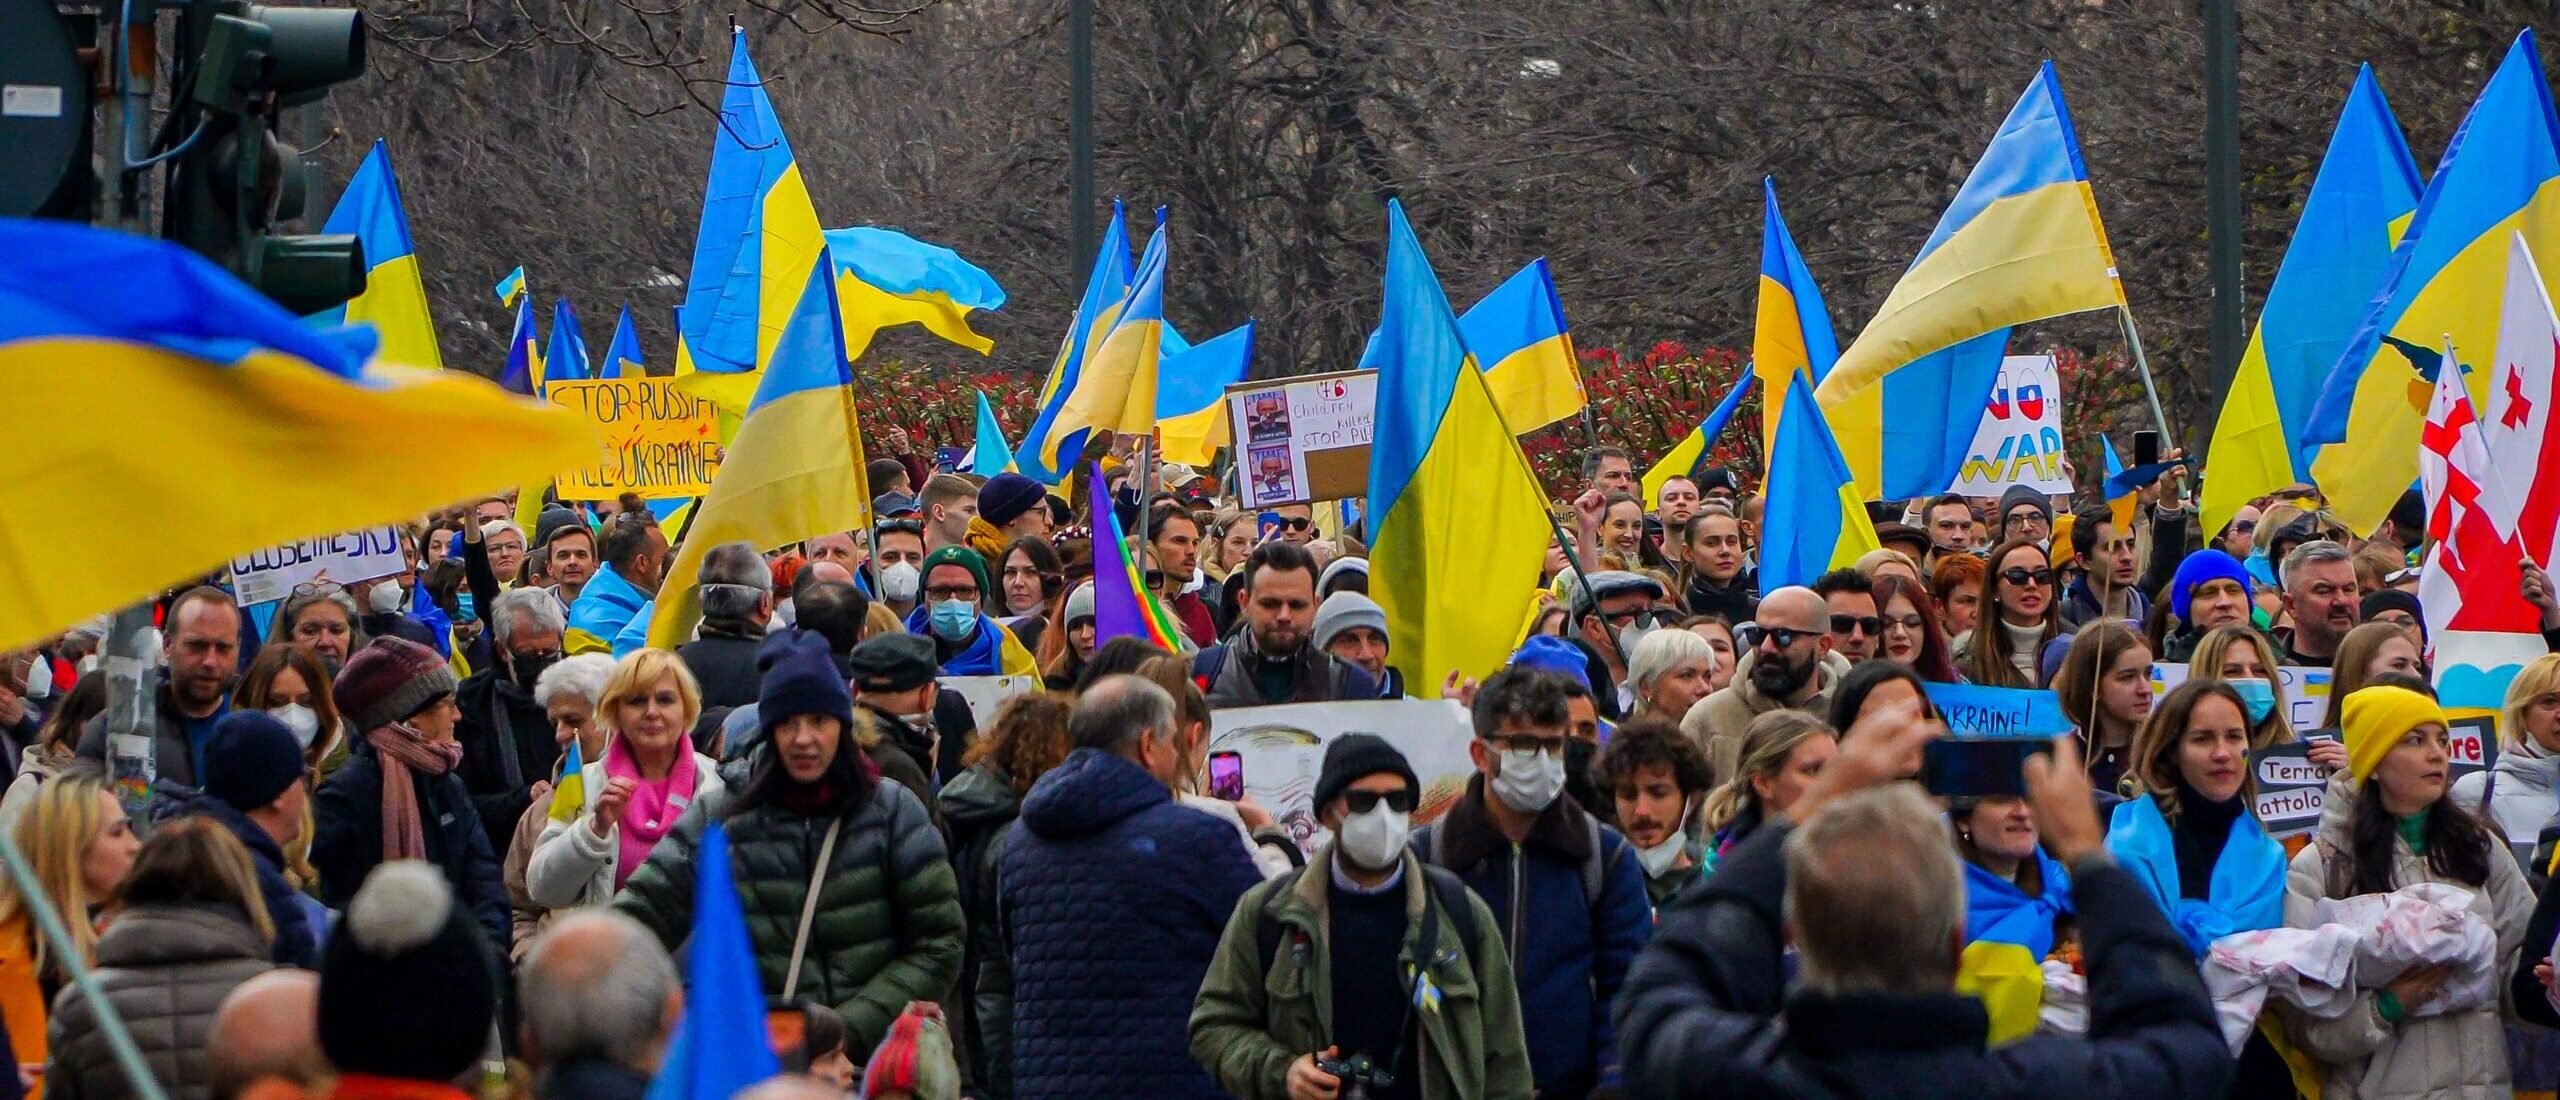 StandWithUkraine global advocacy campaign: sample letter of appeal to governments